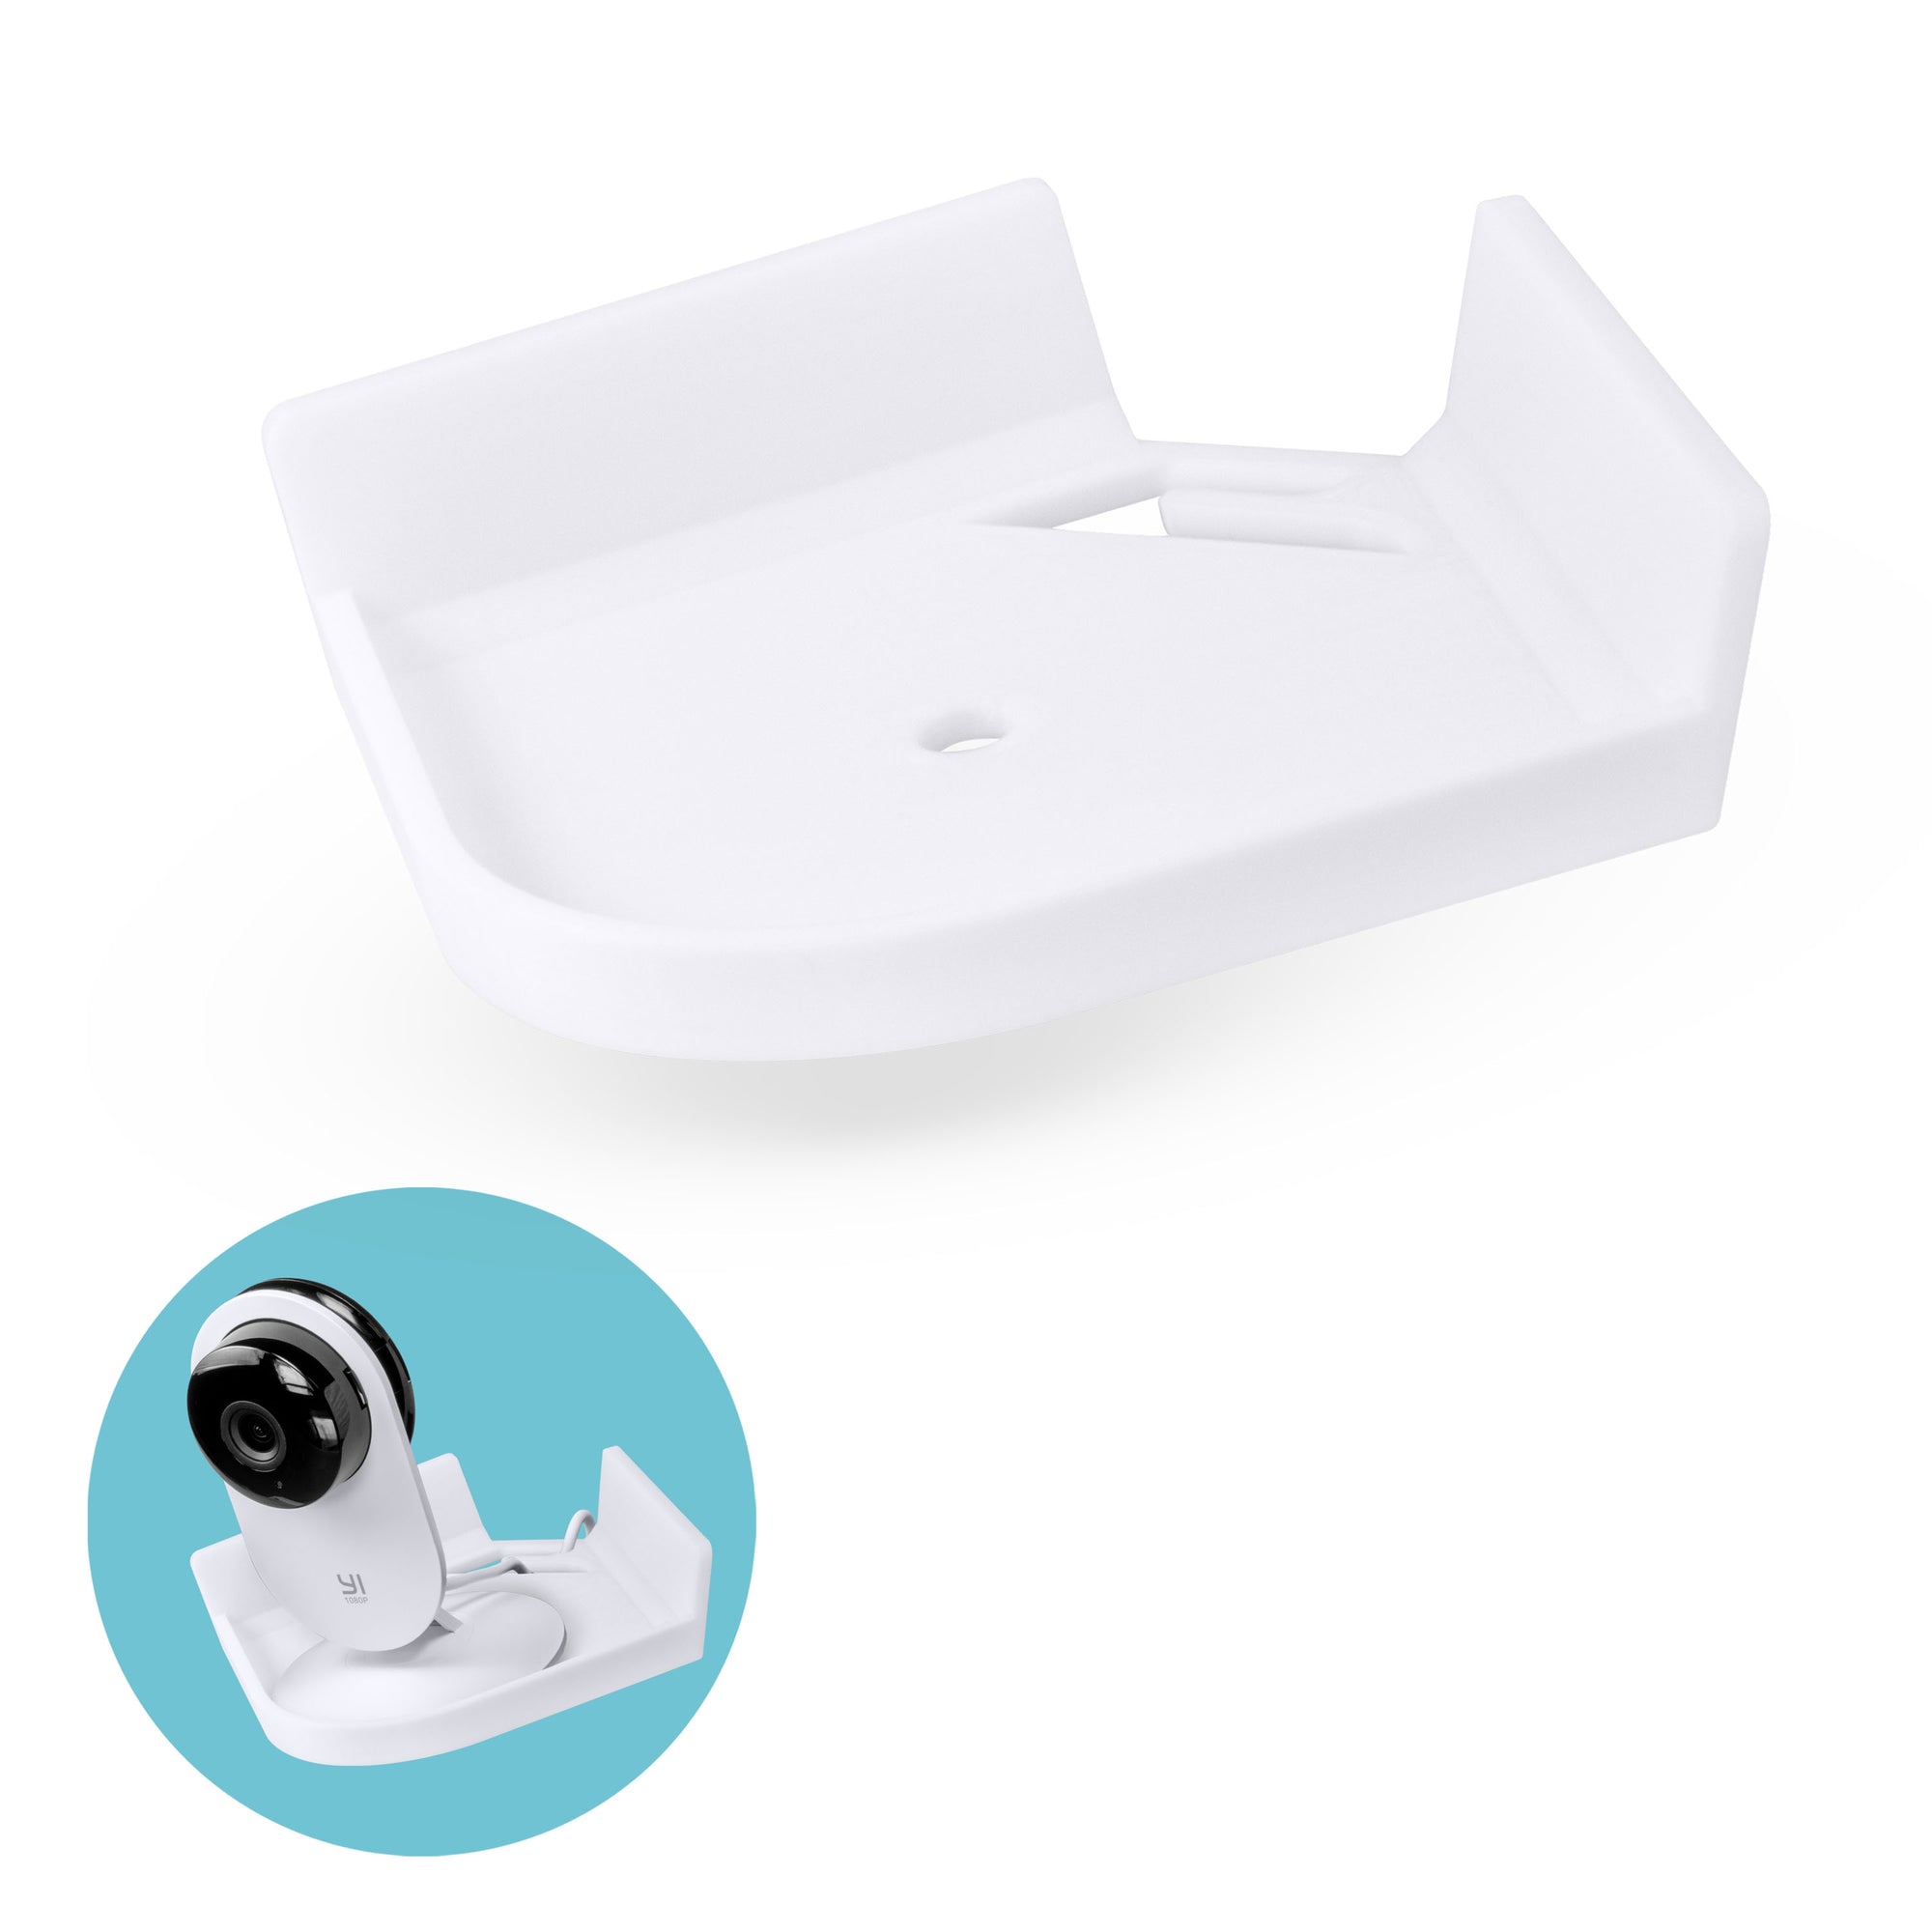 Adhesive Universal Tilted Corner Shelf for Security Cameras, Baby Monitors & Home Security Sensors